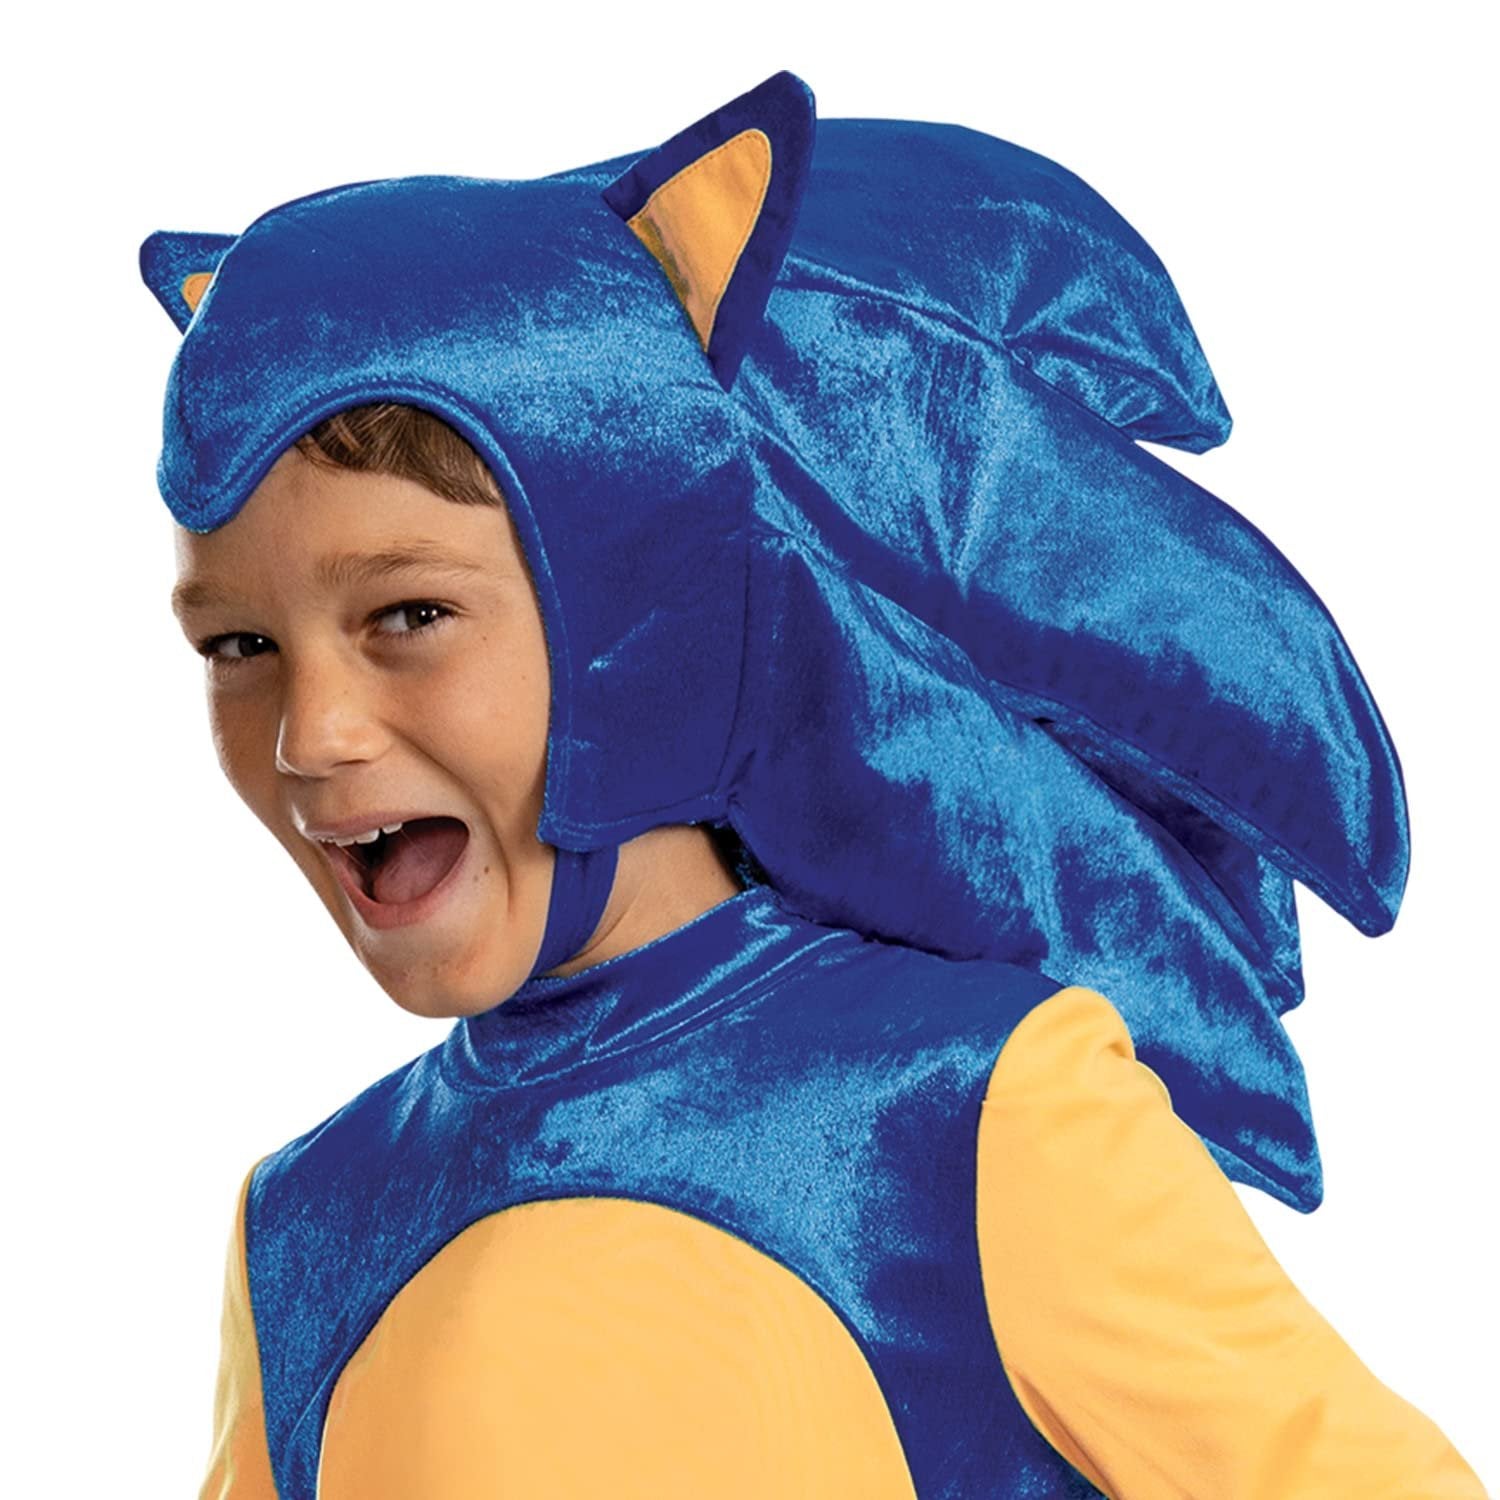 Disguise Deluxe Sonic Costume for Kids, Official Sonic Prime Costume and Headpiece, Size (4-6)